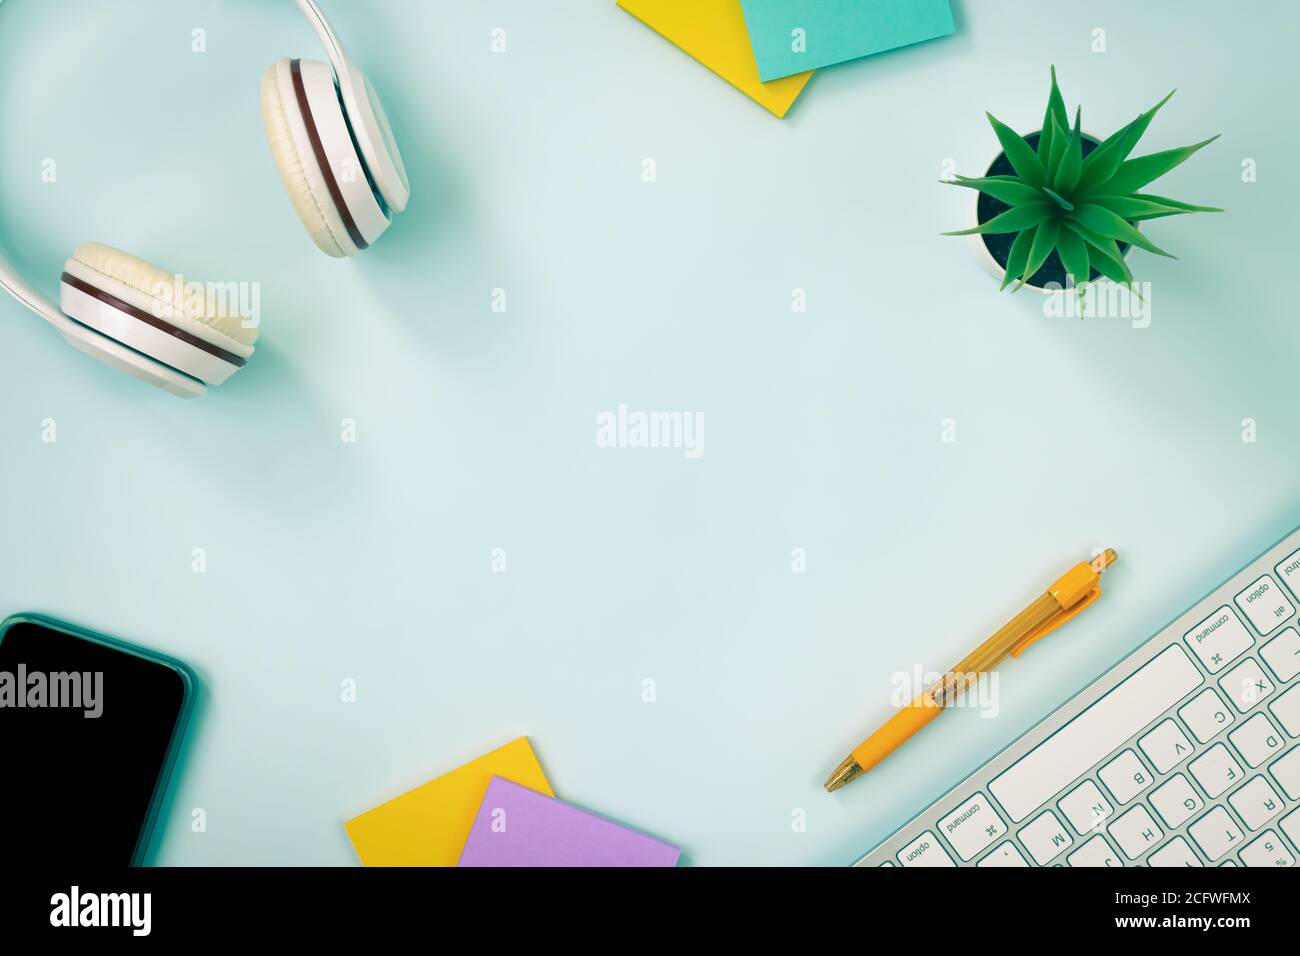 Modern Clean Creative Office Desk or Table on Top View or Flat Lay and Stationery as Keyboard,Headphone,Pen,Sticky Note,Office Plants,Mobile Phone. Mi Stock Photo